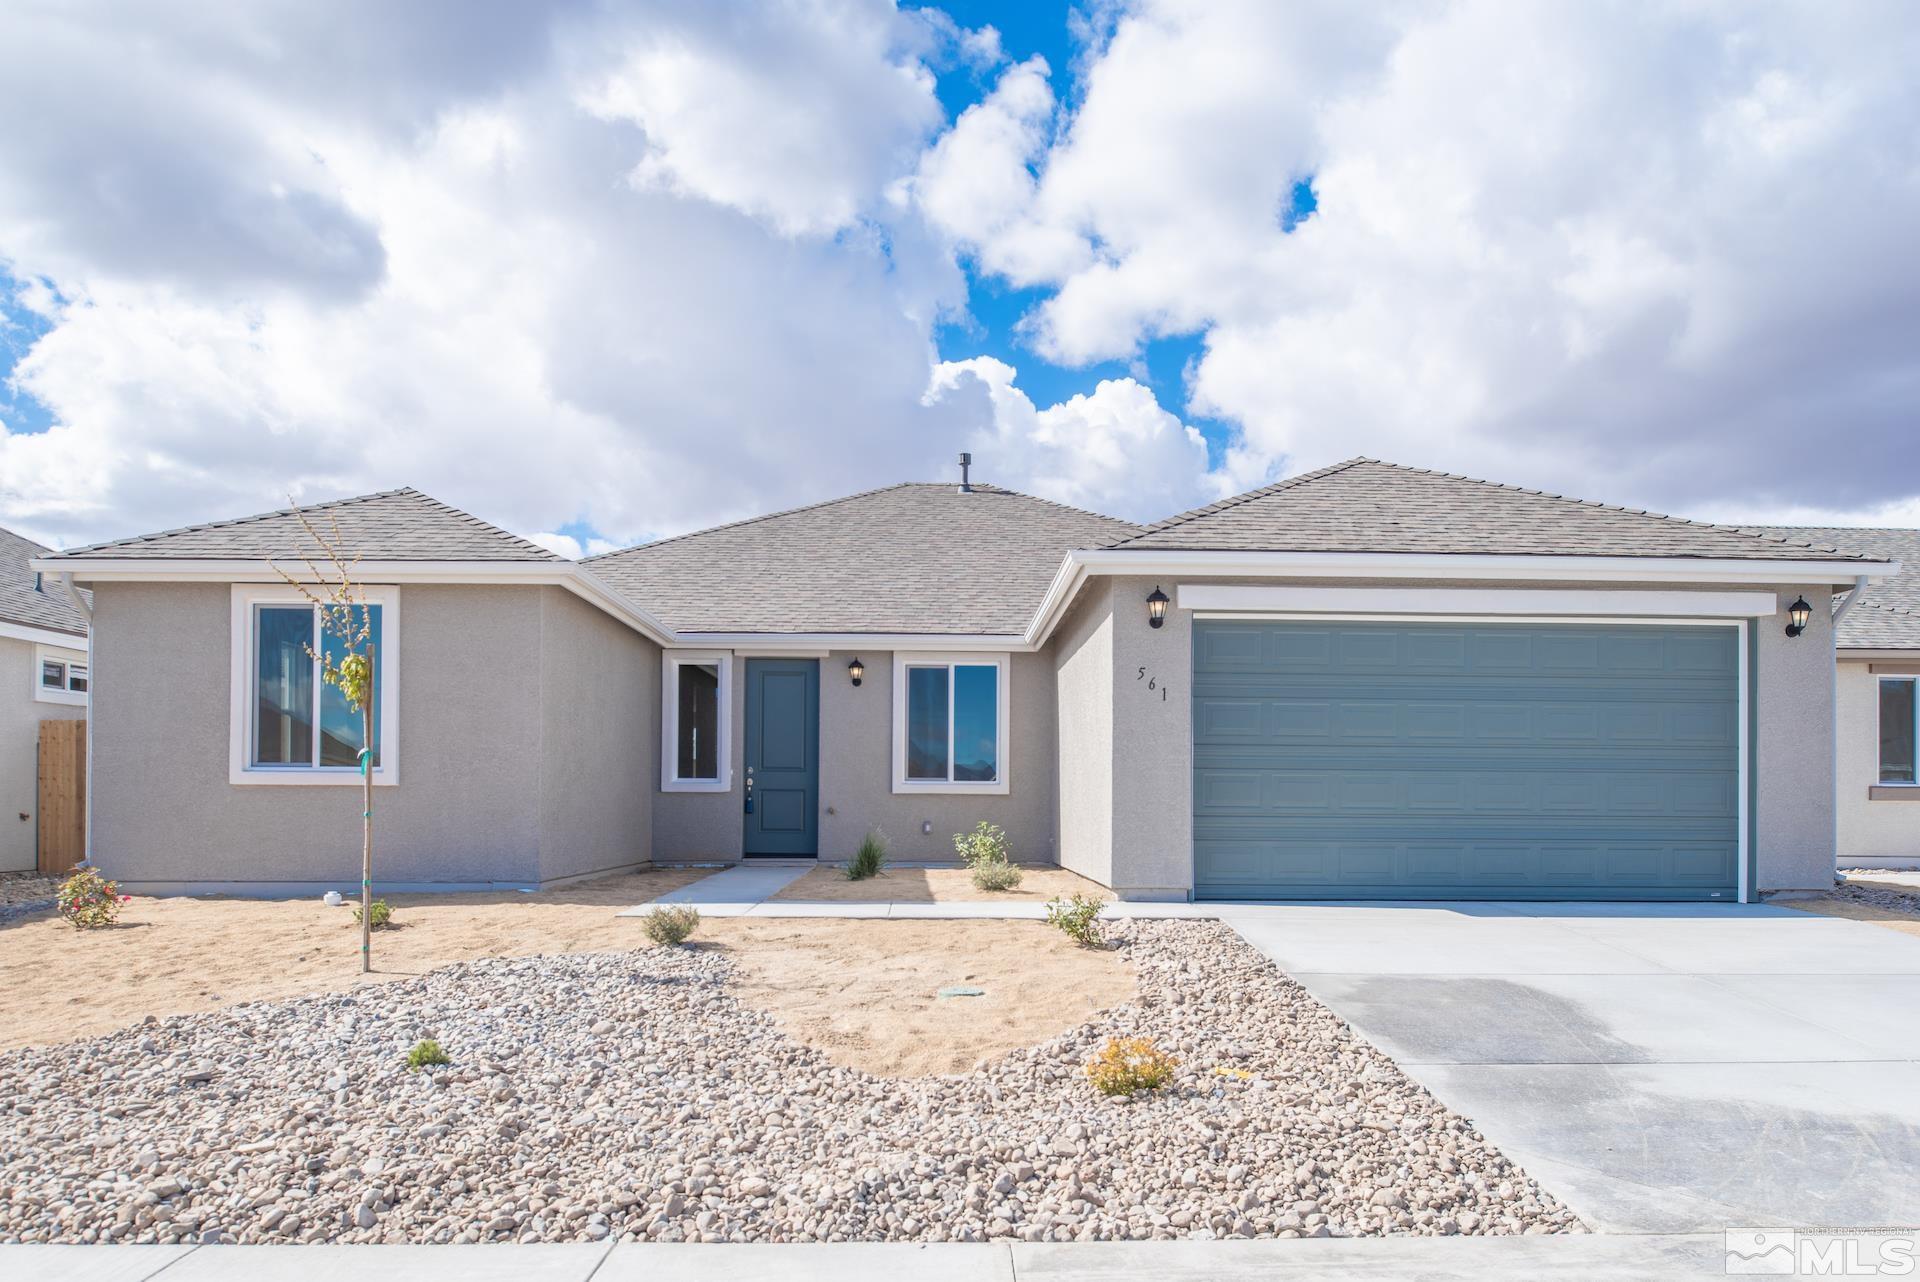 561 Country Hollow 149, Fernley, NV 89408